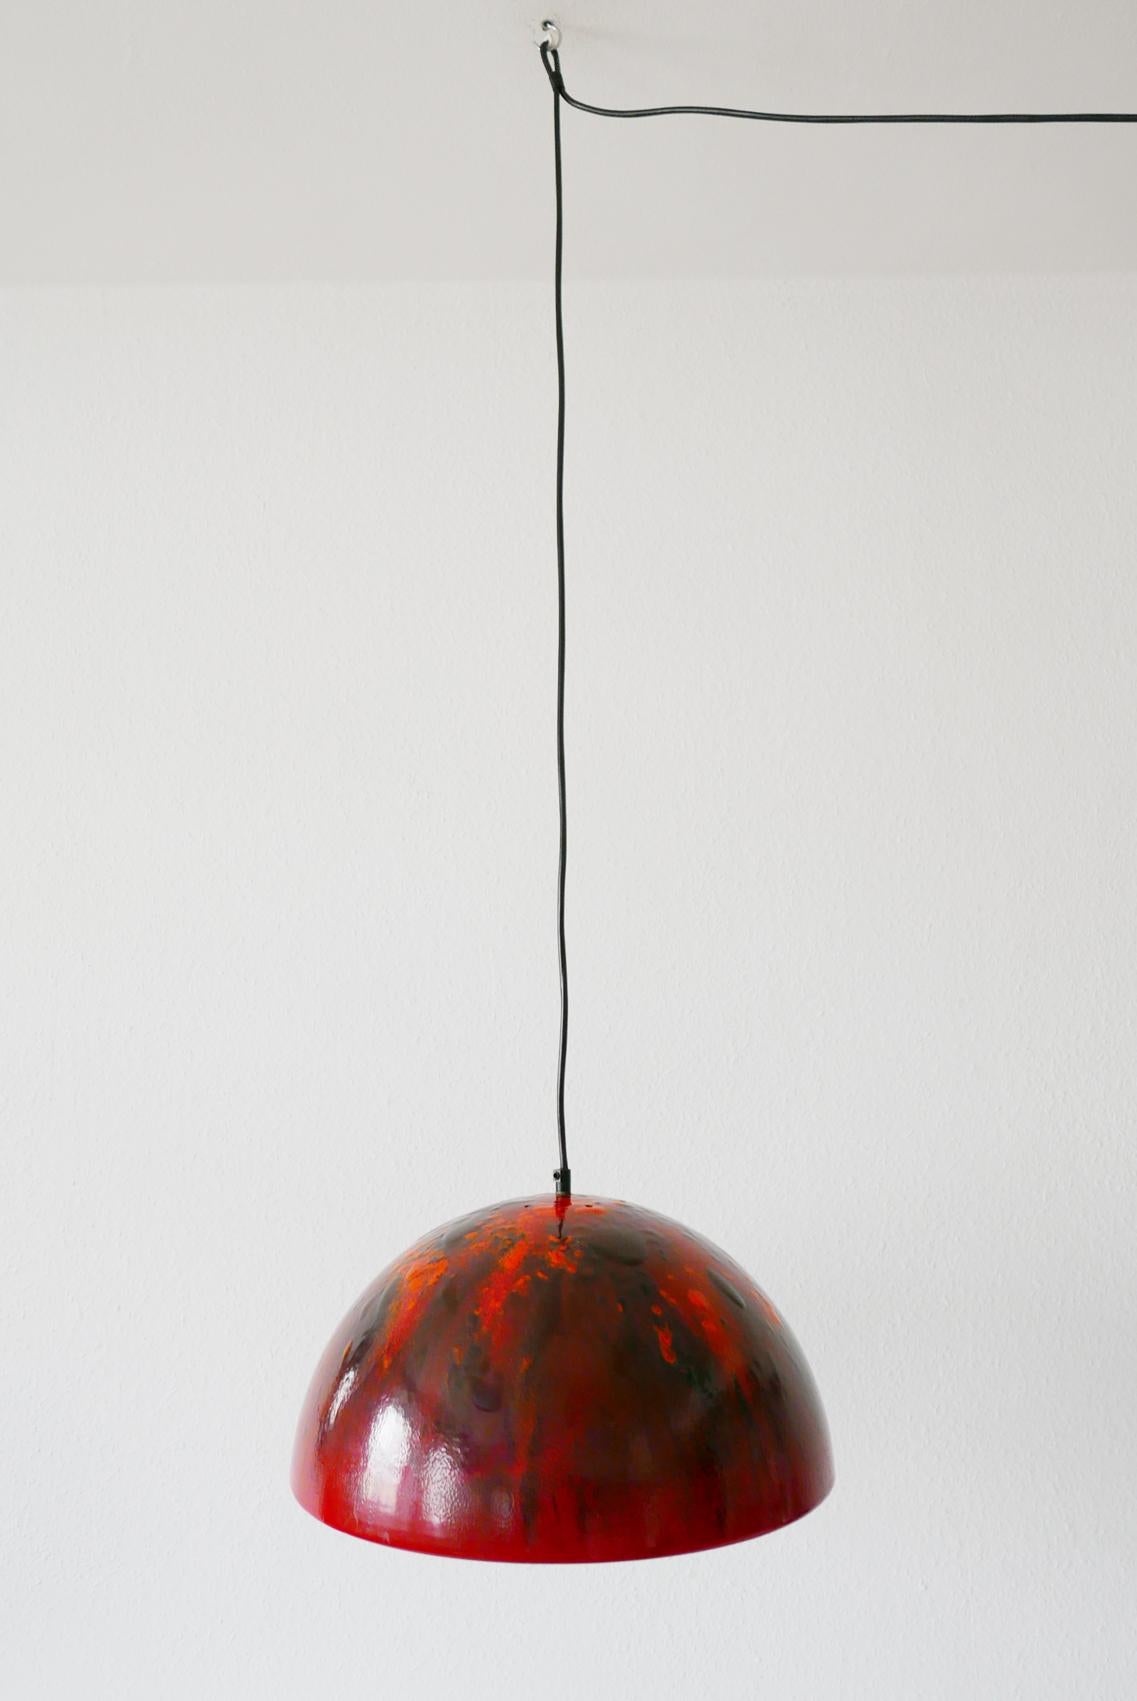 Rare, large Mid-Century Modern pendant lamp. Designed and manufactured probably in 1960s, Denmark.

Executed in outside red, orange, inside white enameled metal. The lamp needs one E27 Edison screw fit bulb, is wired. It runs both on 110 / 230 Volt.